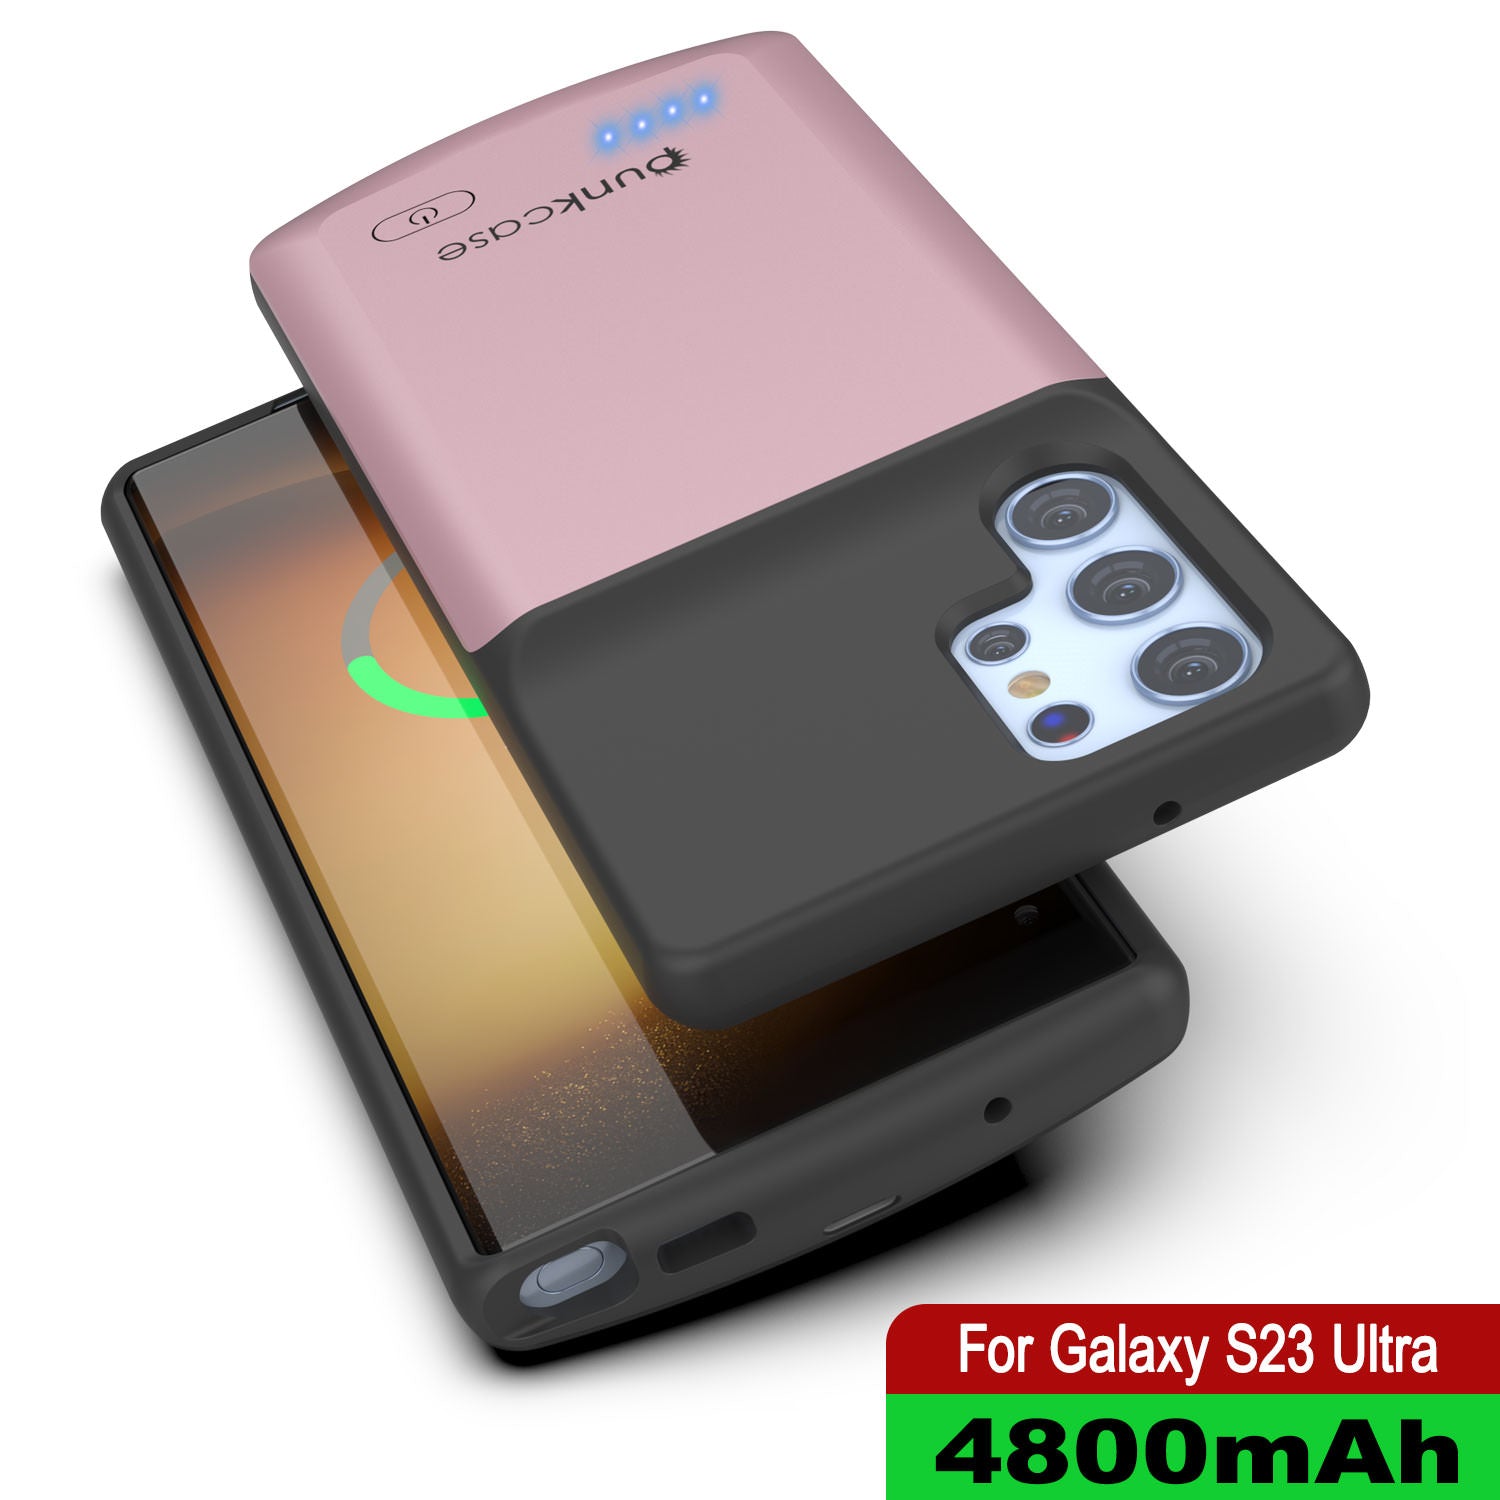 PunkJuice S23 Ultra Battery Case Rose-Gold - Portable Charging Power Juice Bank with 4800mAh